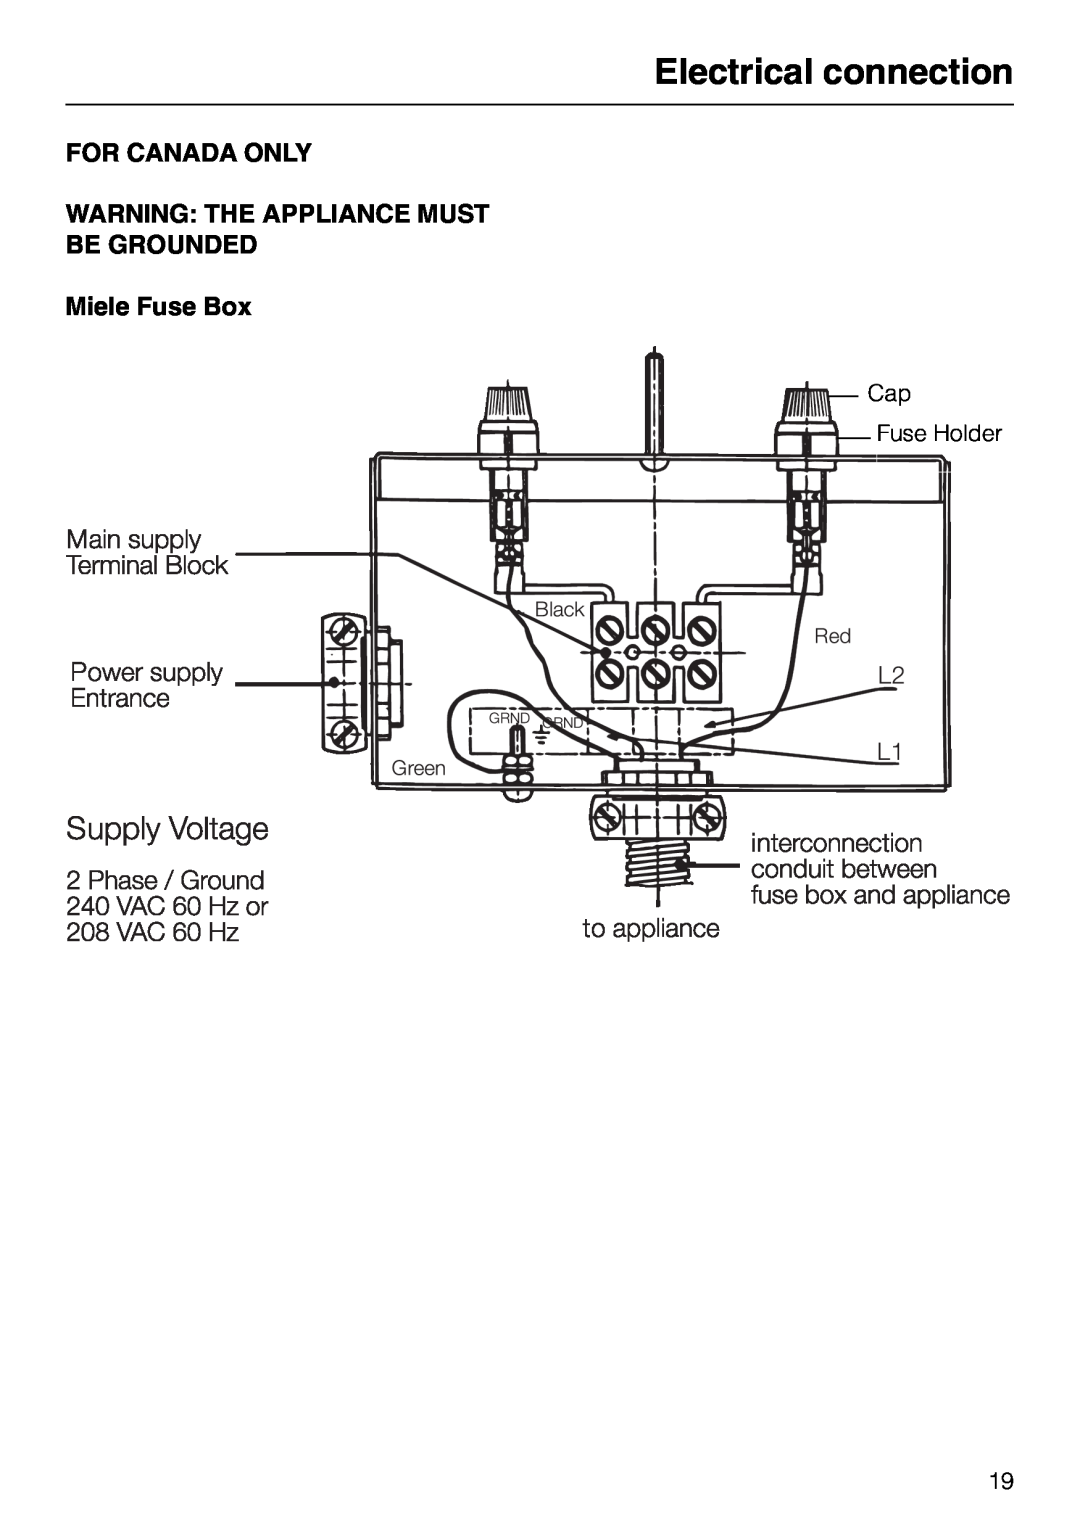 Miele KM 87-2, KM84-2 manual FOR CANADA ONLY WARNING THE APPLIANCE MUST BE GROUNDED Miele Fuse Box, Electrical connection 